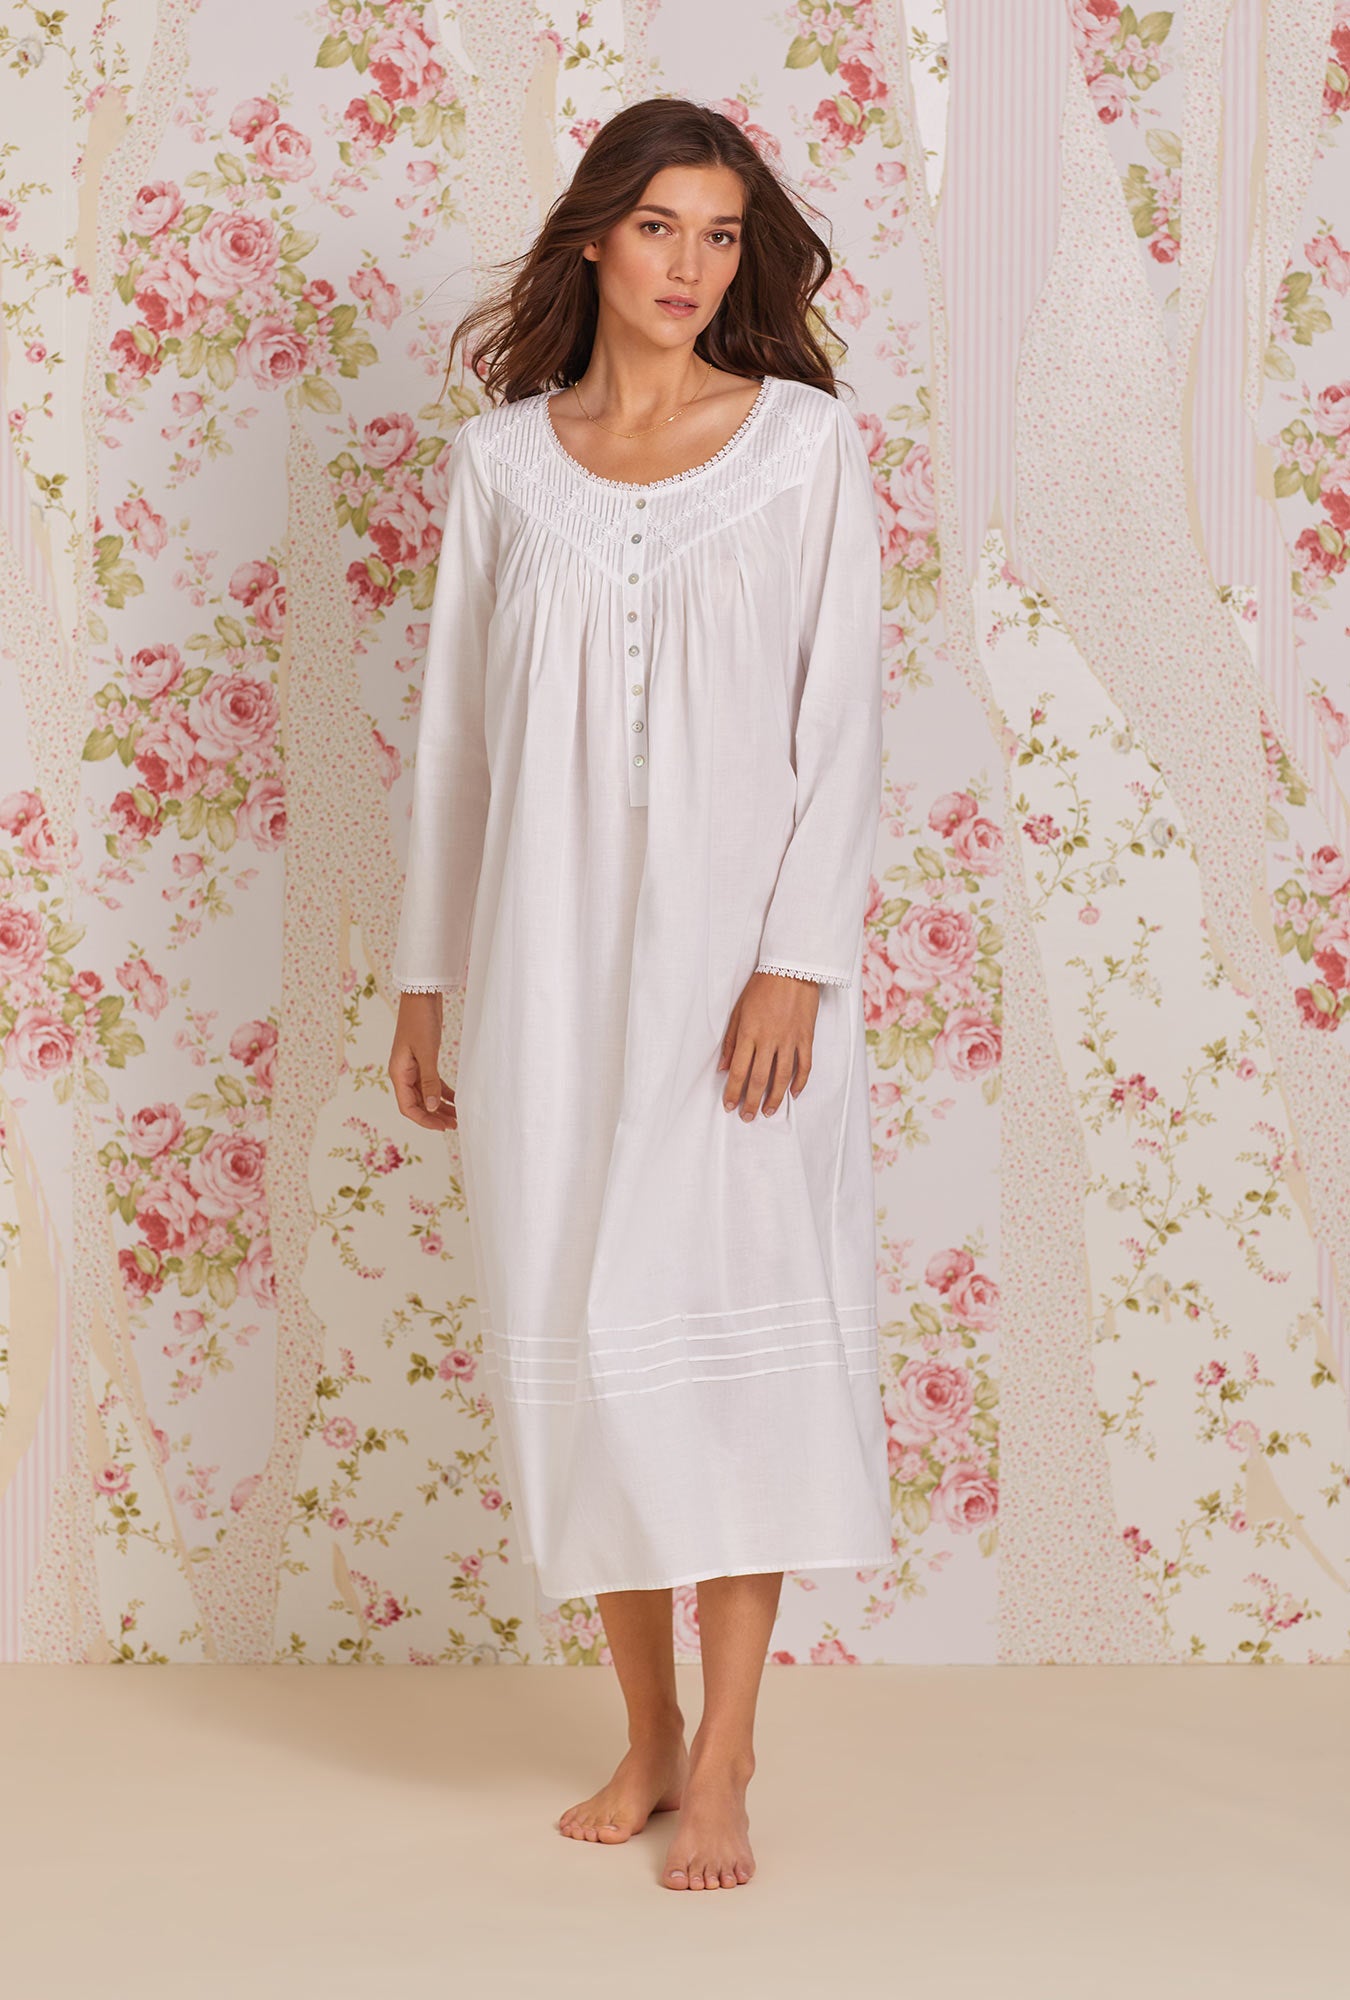 Eileen West  Sleepwear, Intimate Apparel, Dresses, Products for Home